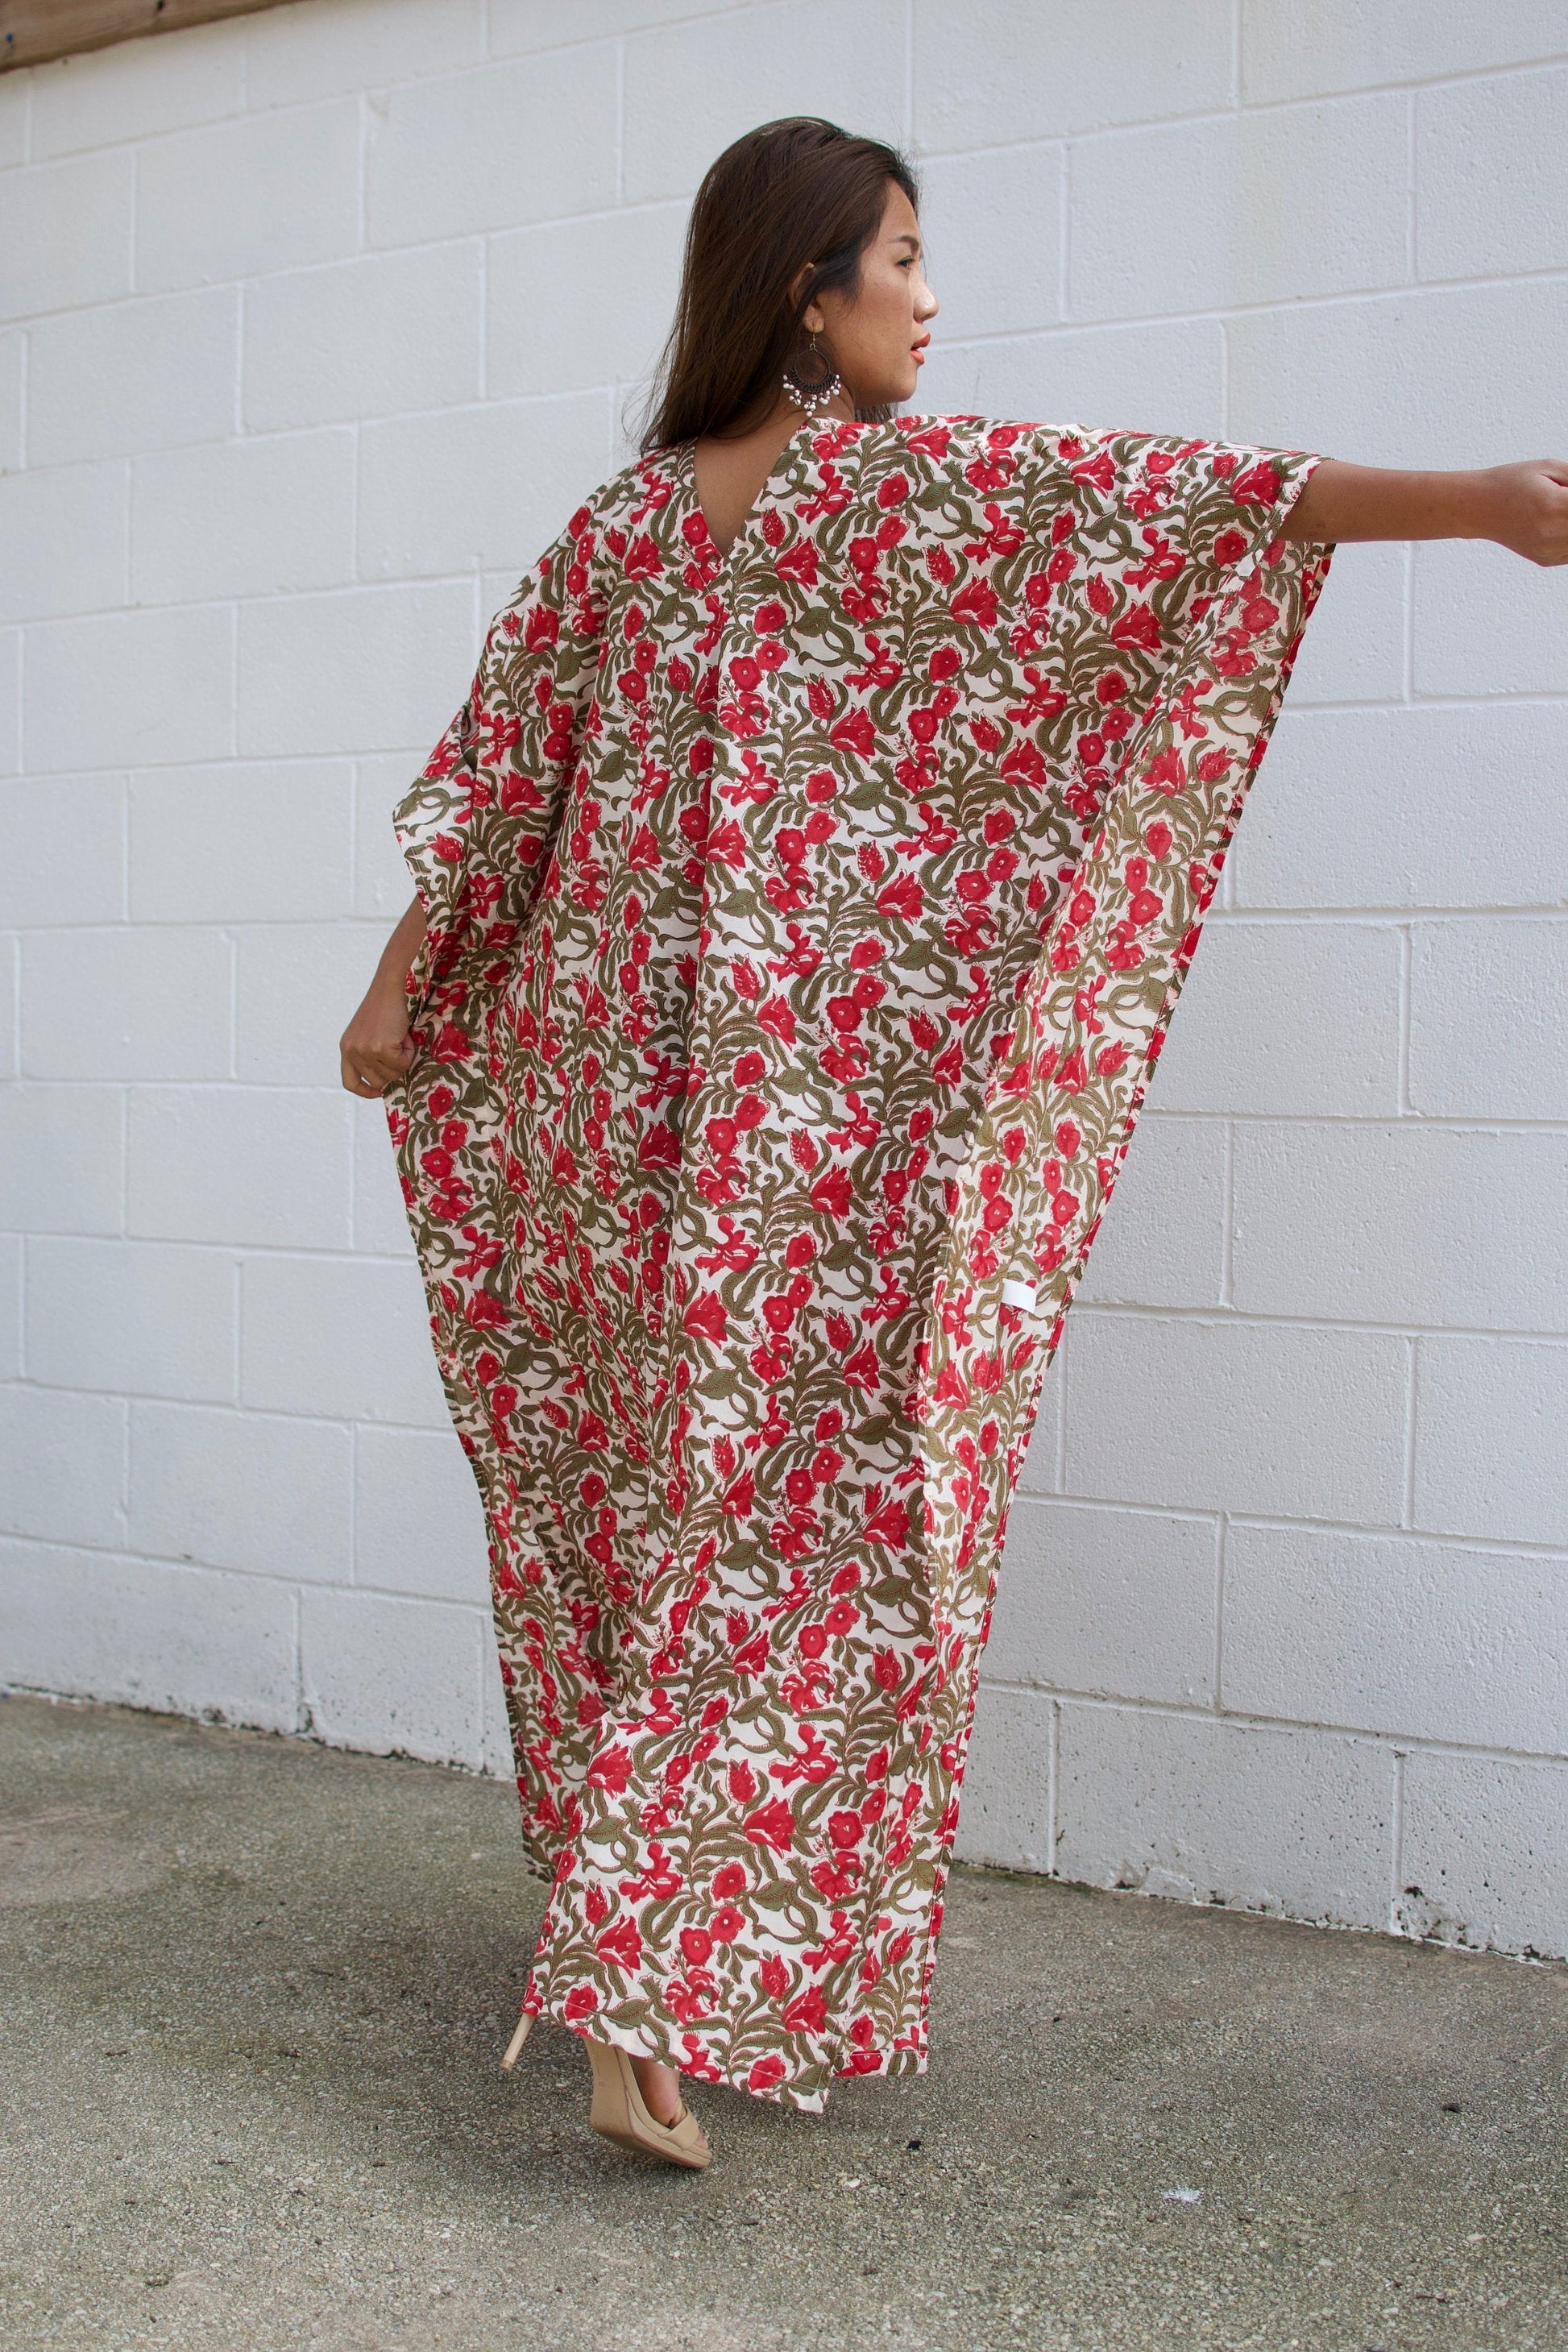 MALA handworks 56 Evelyn Kaftan in White and Floral Pattern